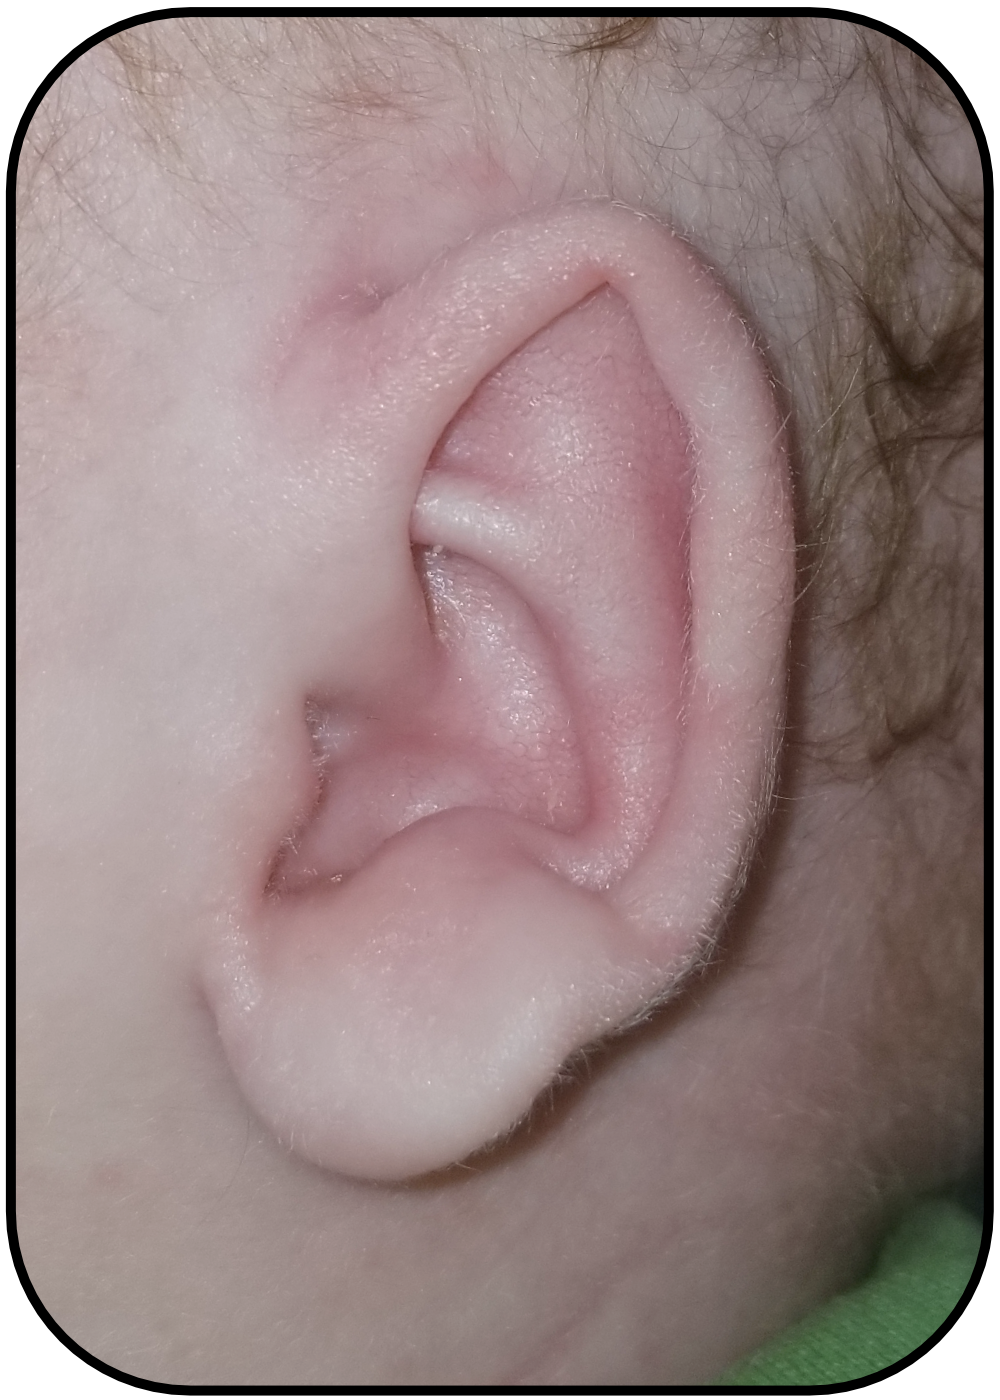 Folded Over Ears can be Fixed without Surgery